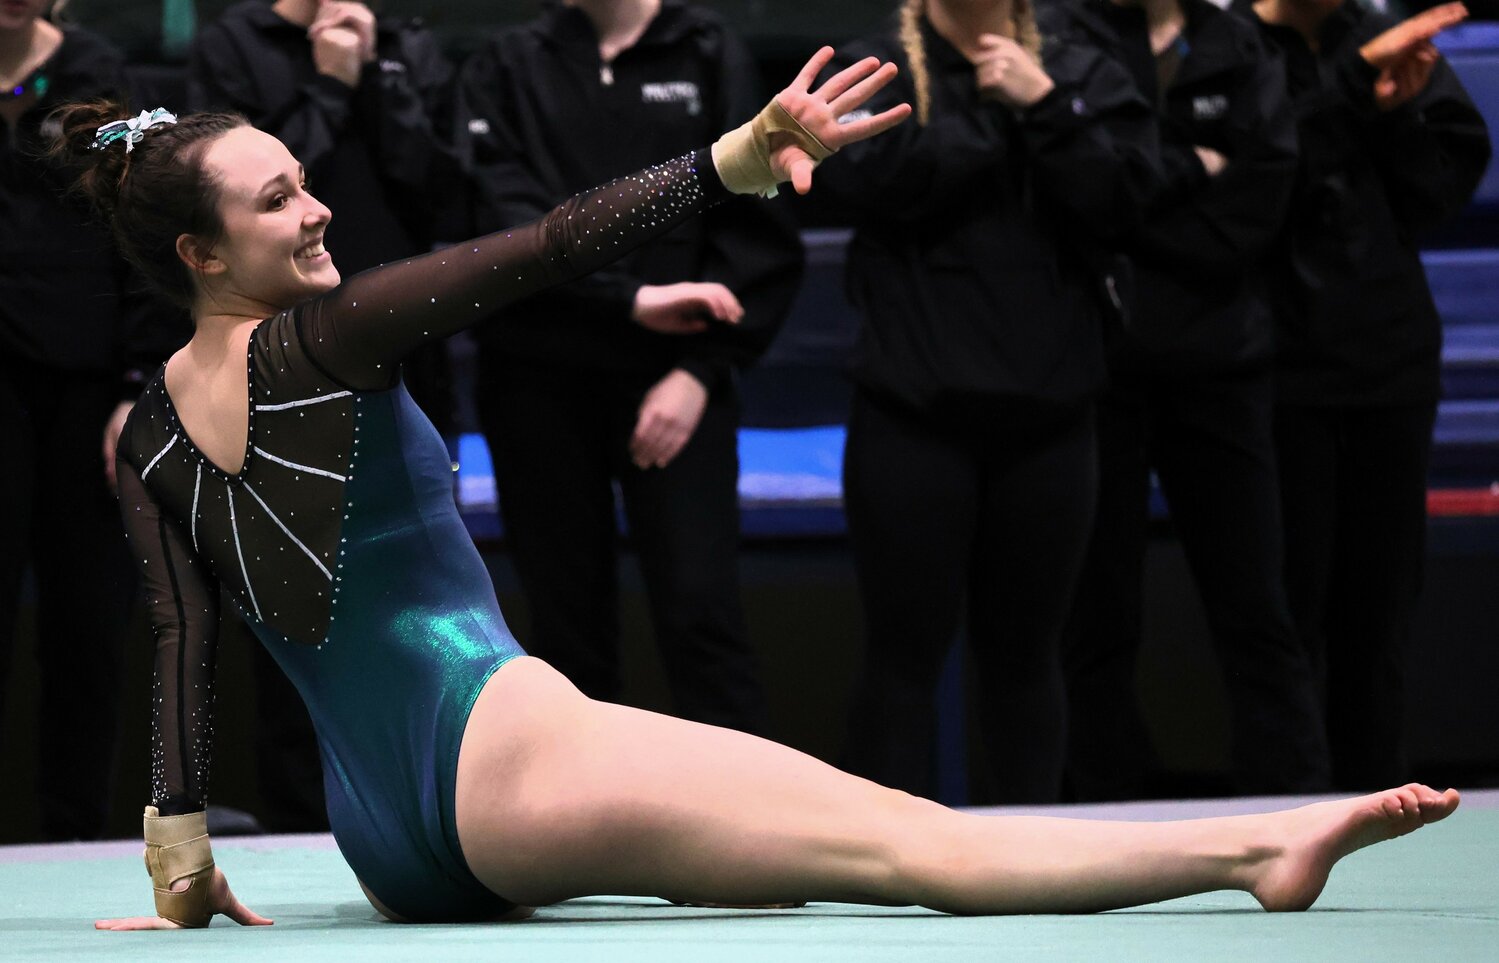 Emily Dahlstrom is all smiles as she competes on the floor, earning a score of 9.475 Thursday.